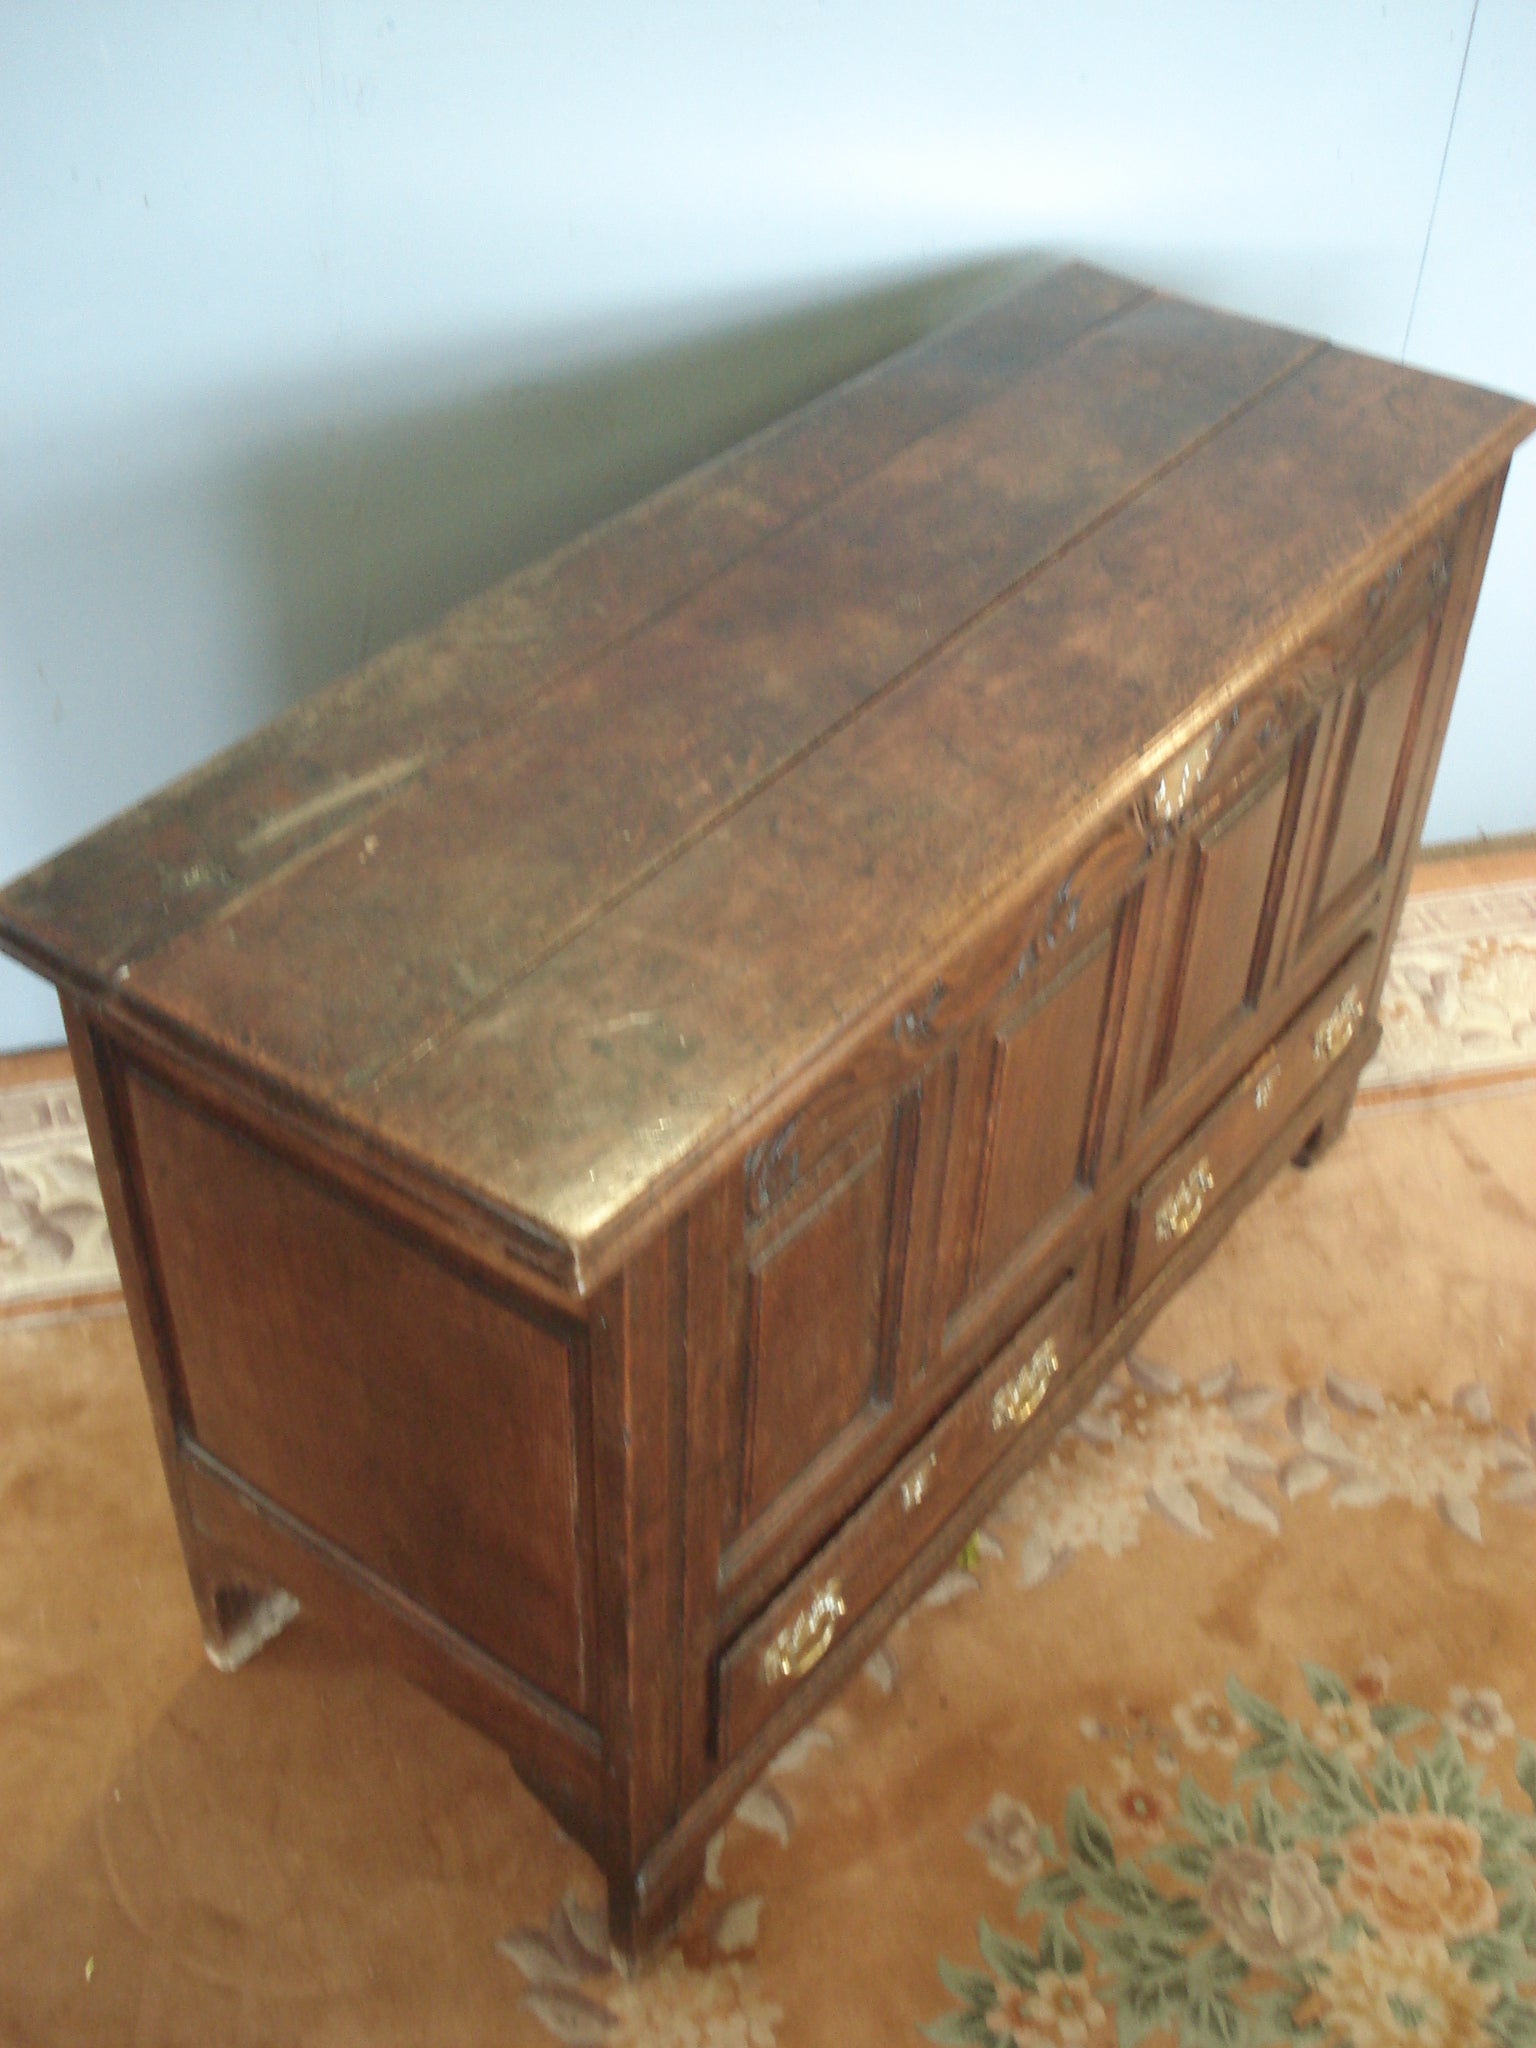 Circa 1800. Oak mule chest with rich deep patination.